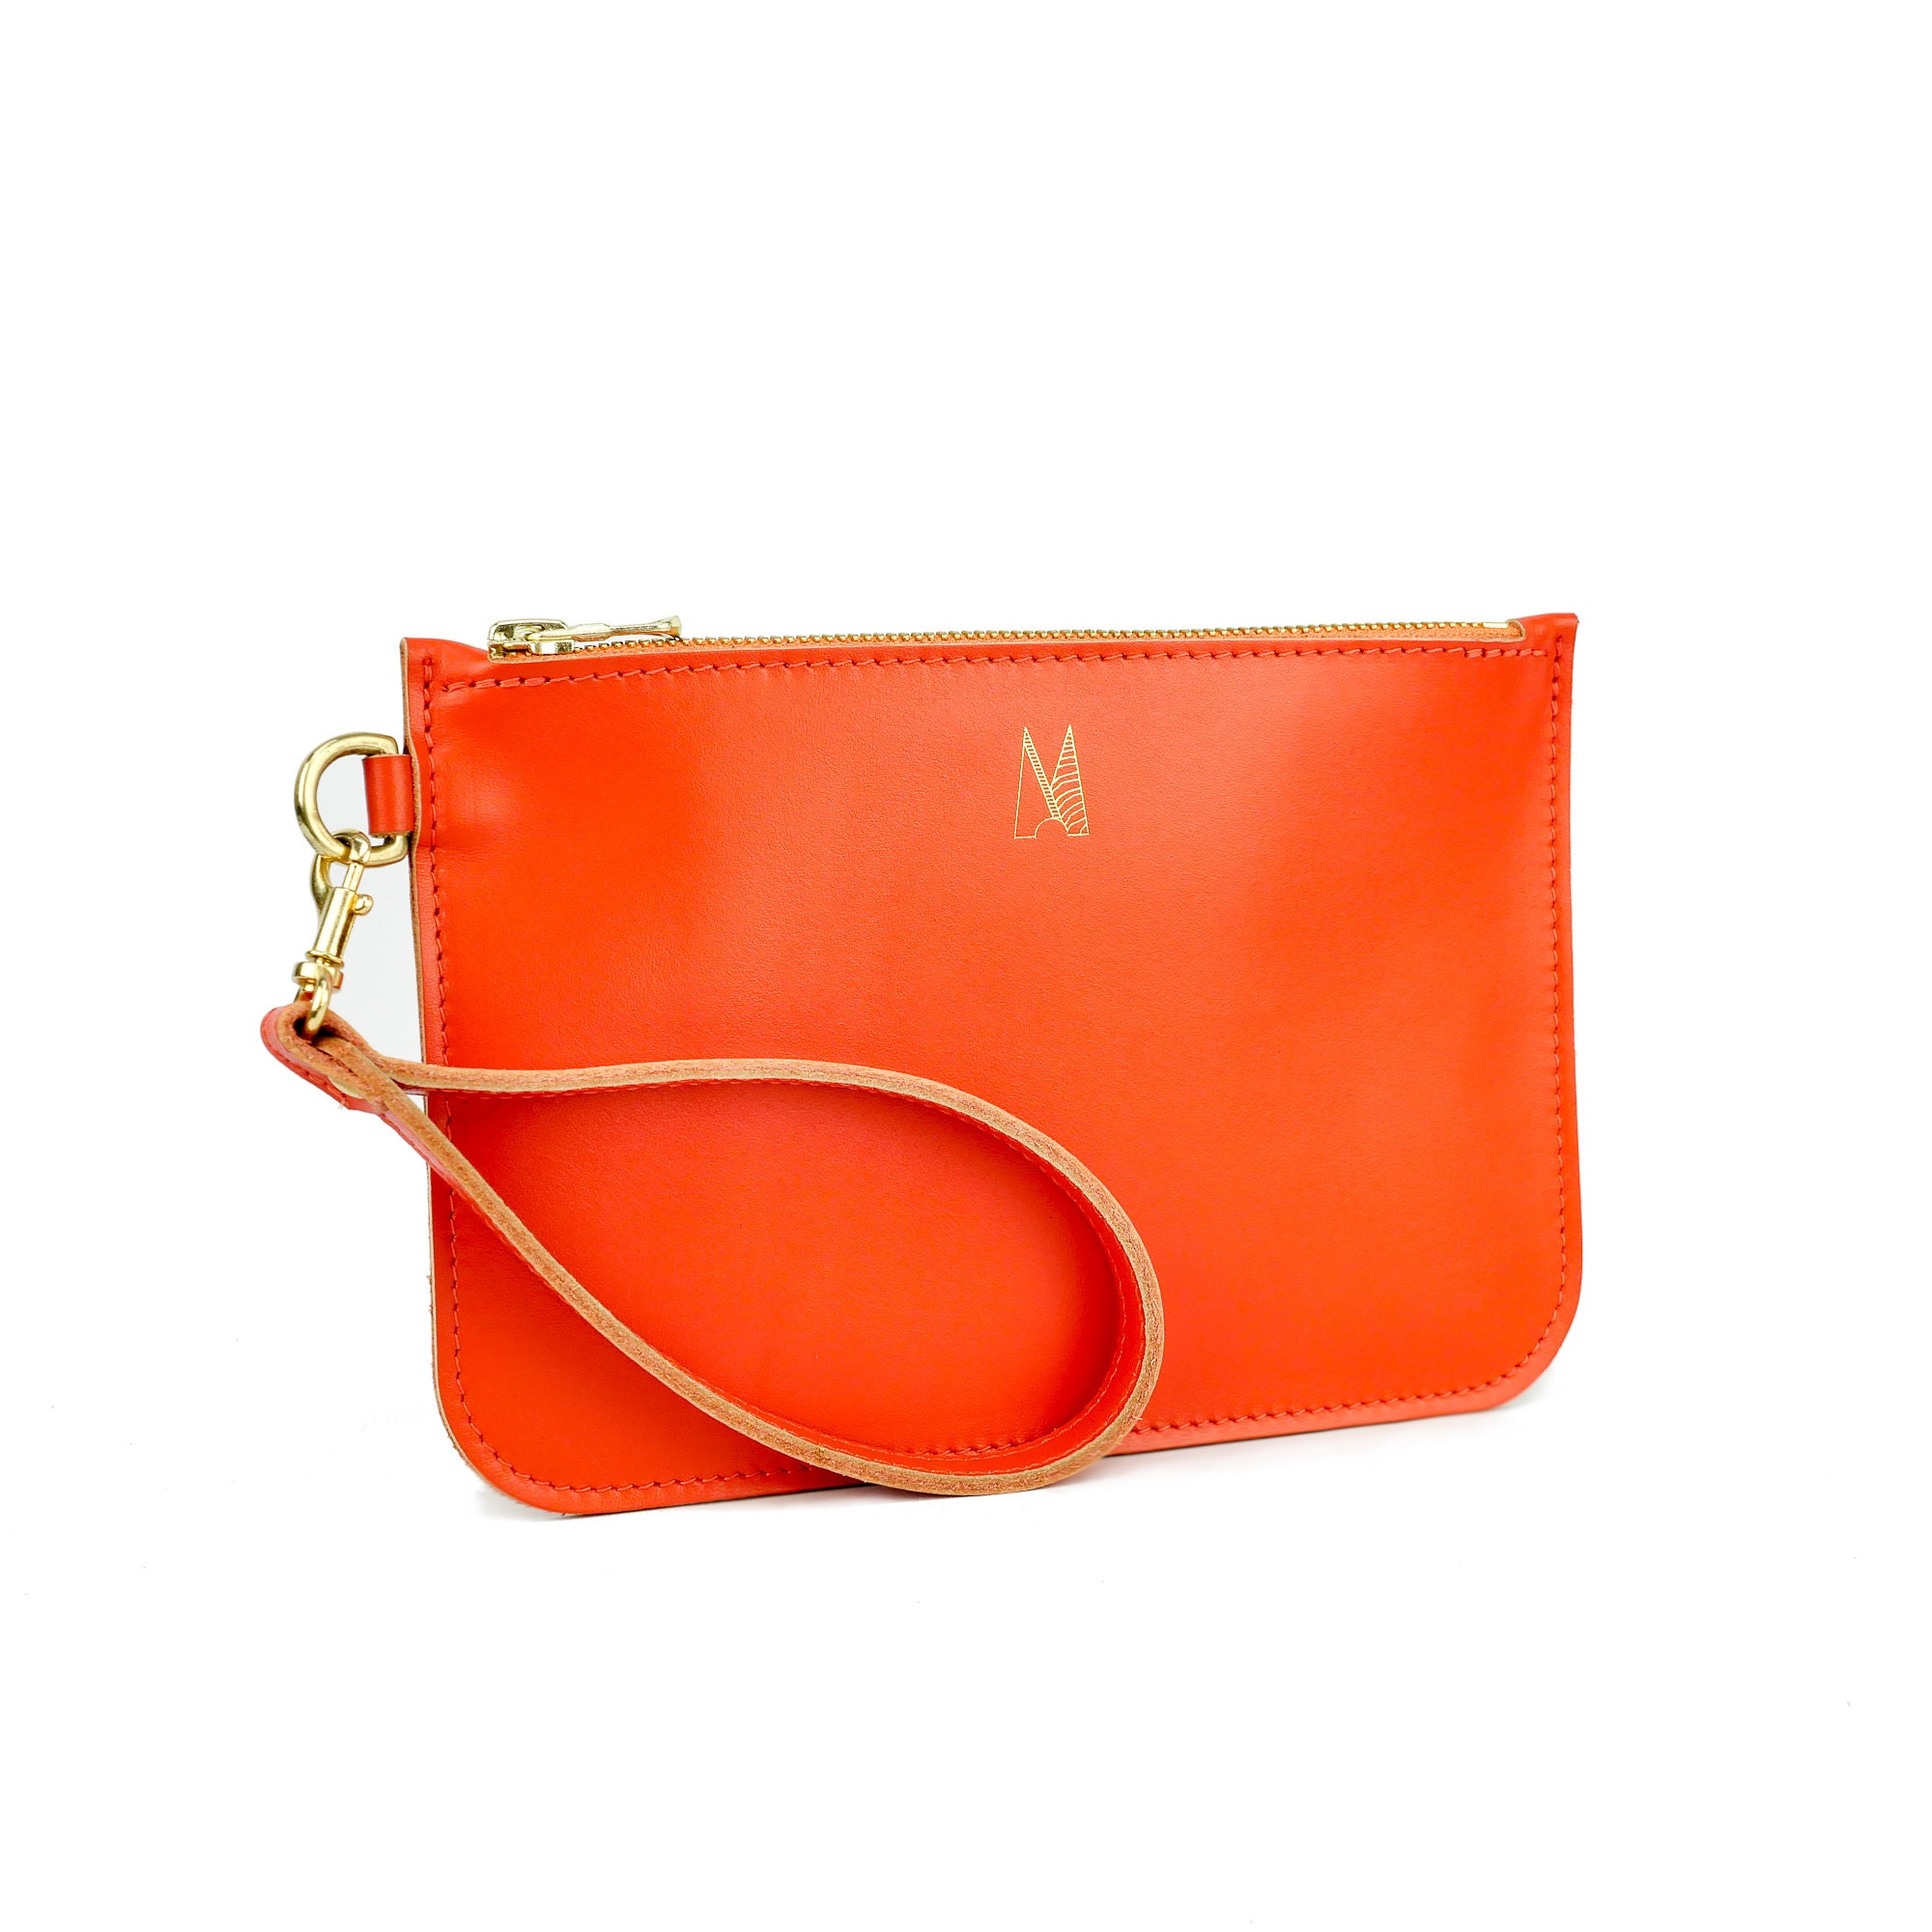 Hand-stitched Red Envelope Clutch in soft Italian leather — Sunshine & Rain